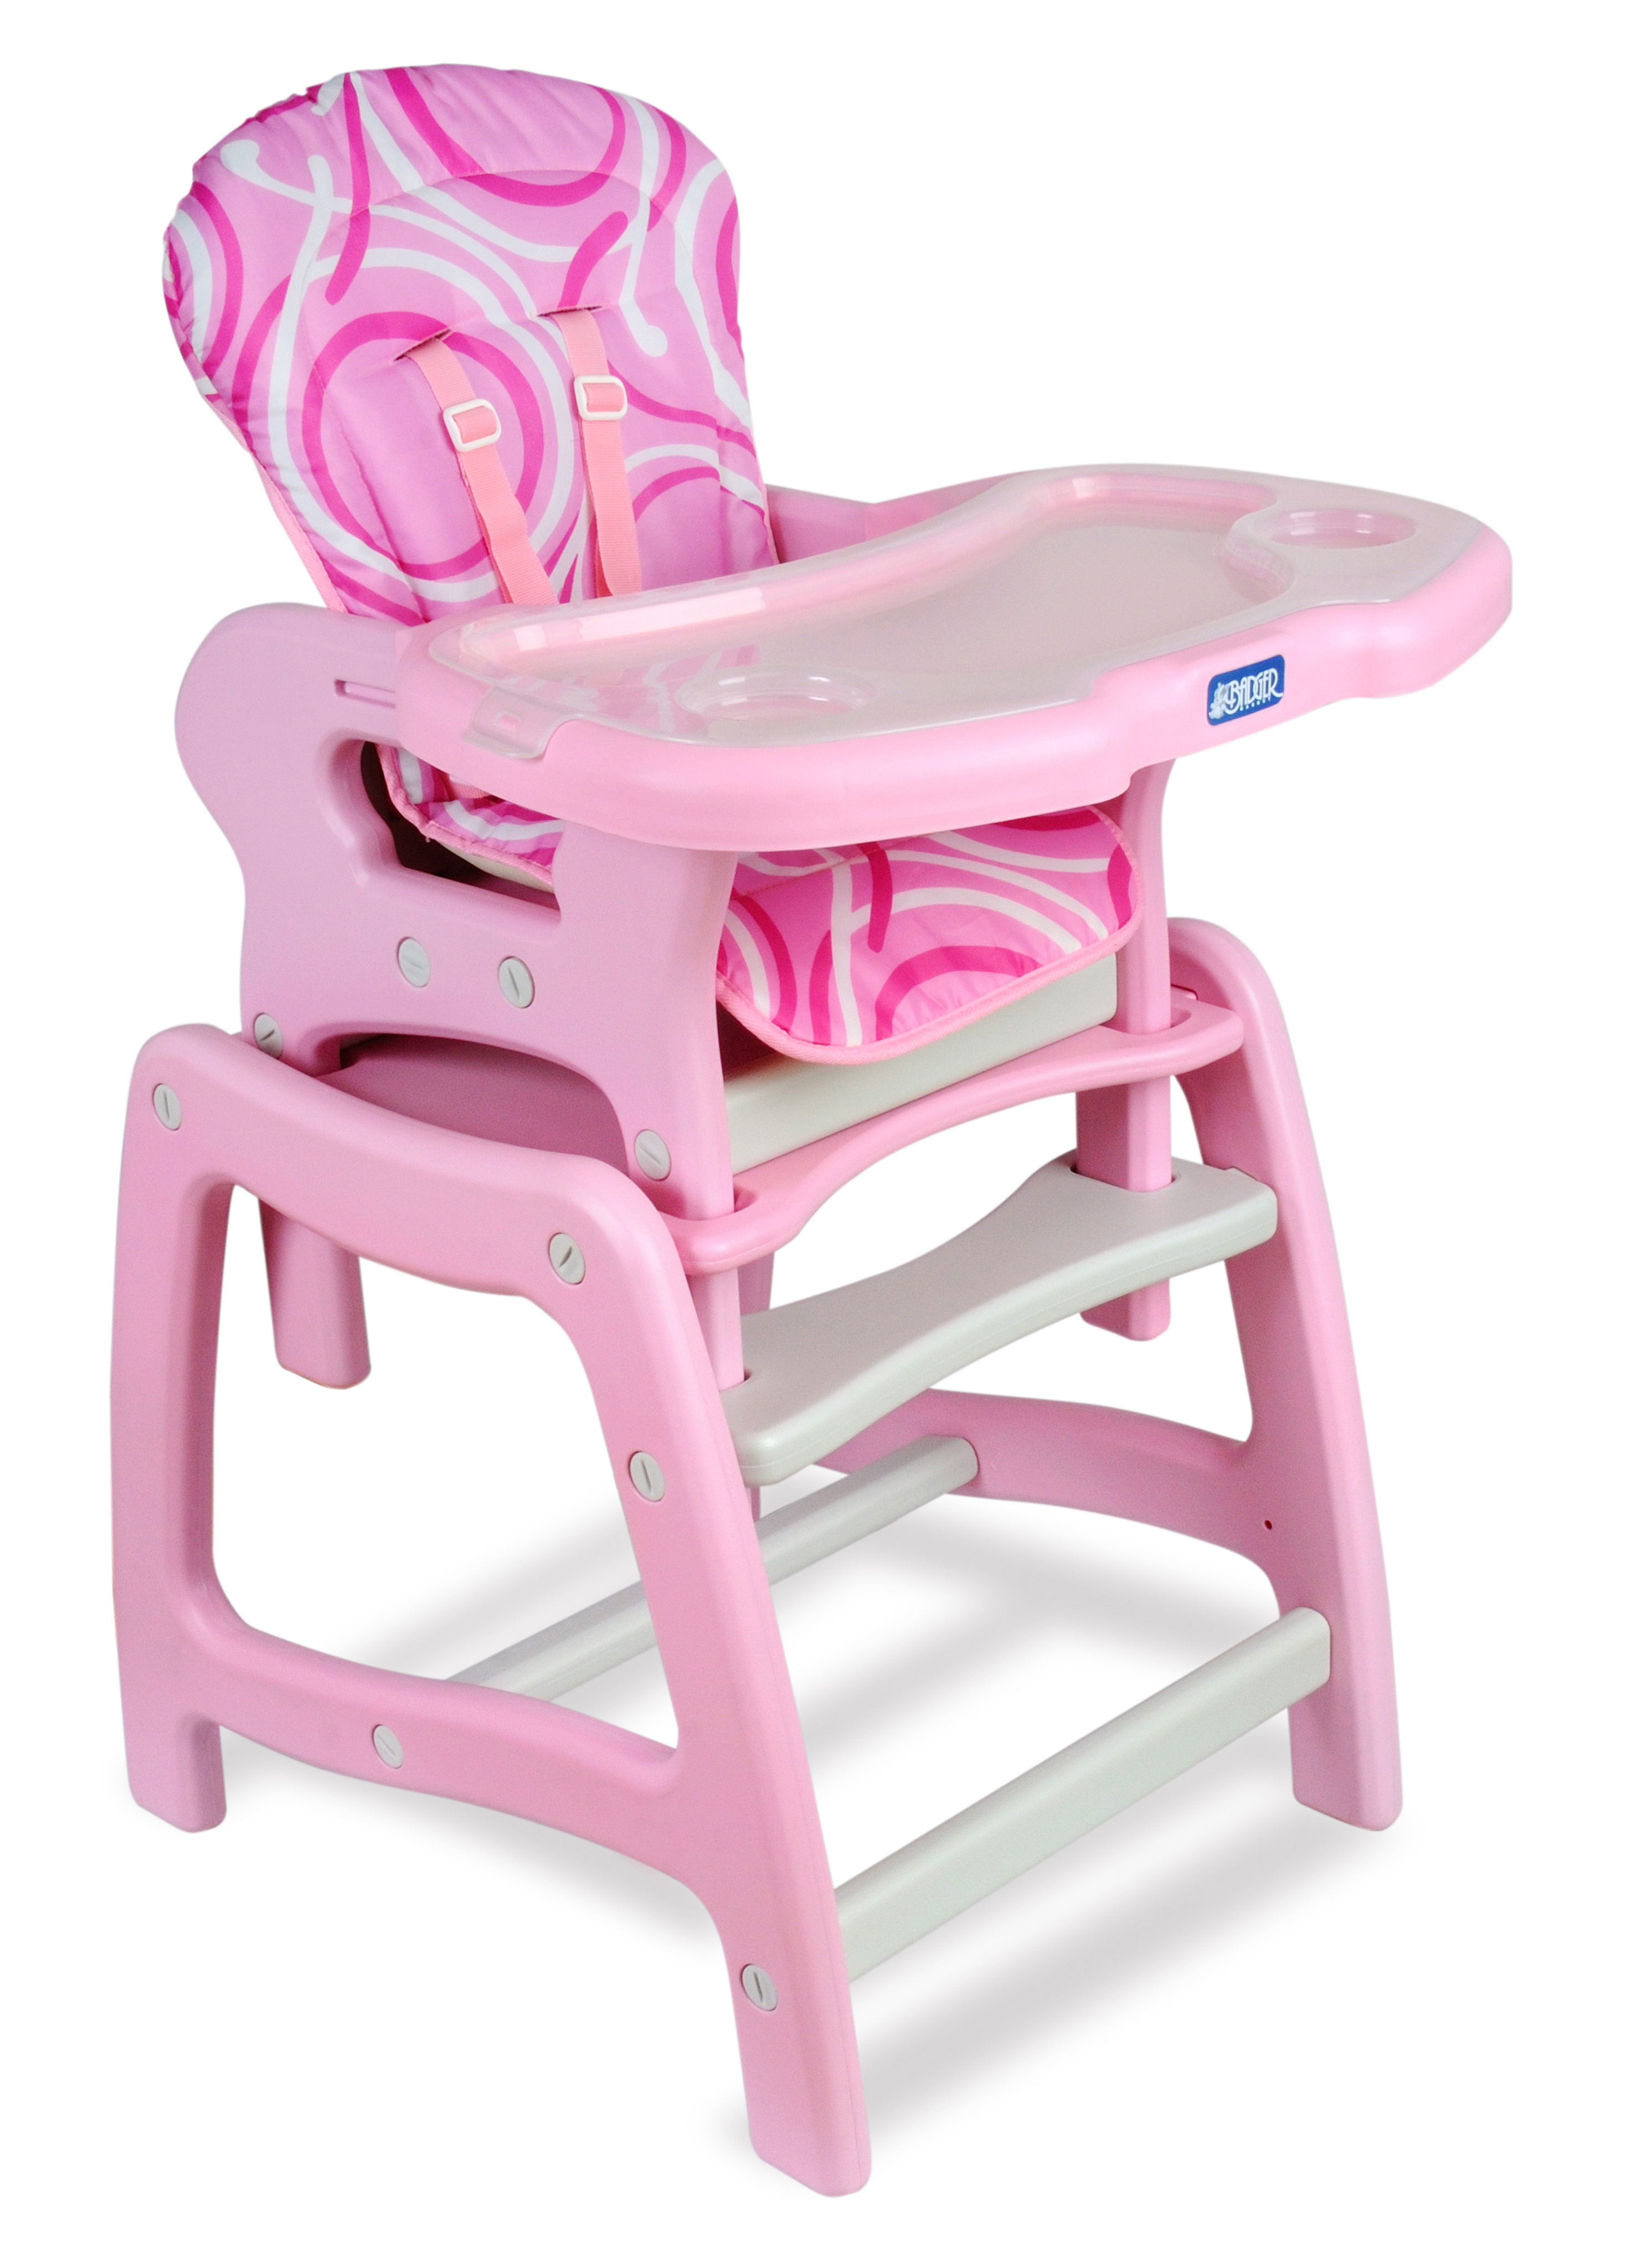 Envee Baby High Chair with Playtable Conversion - Pink/White